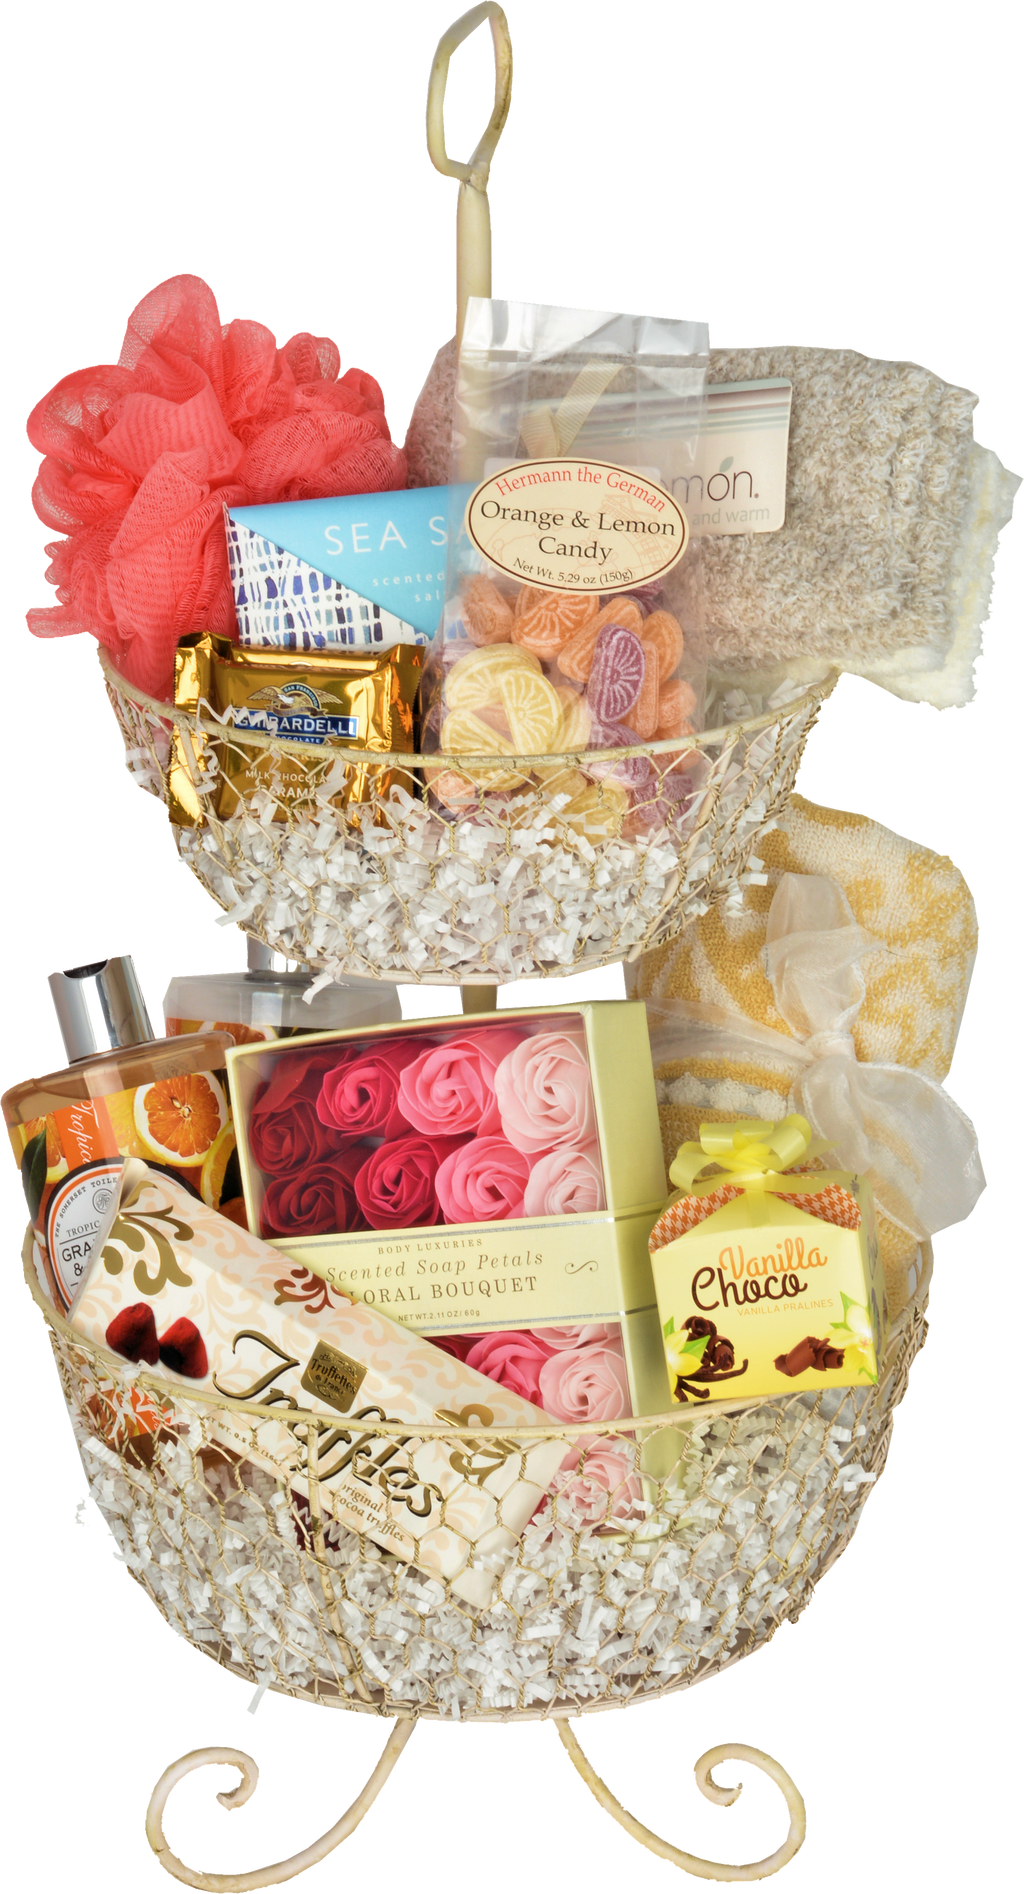 THE JUST BECAUSE FOR HER "CUSTOM MADE" - KS Gift Baskets